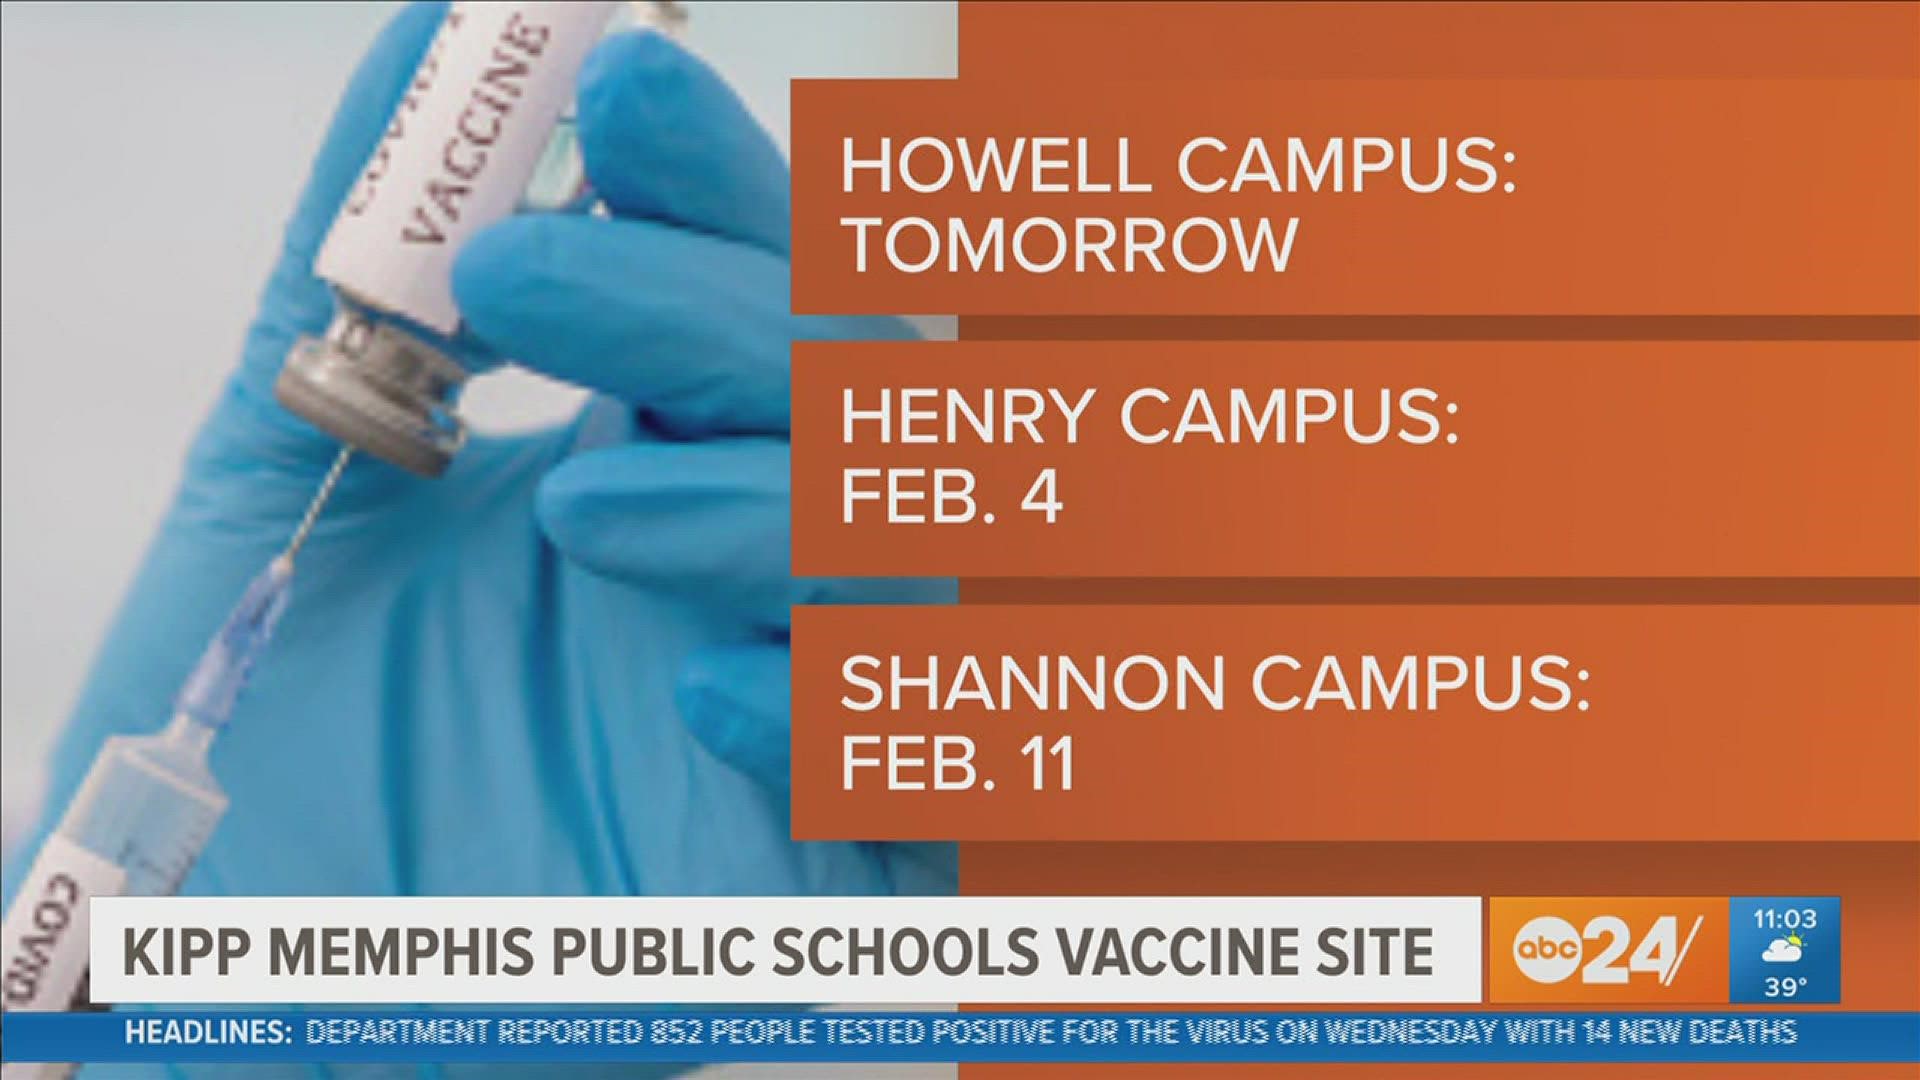 The vaccination events are open to the public, and will be held over the next three Fridays.